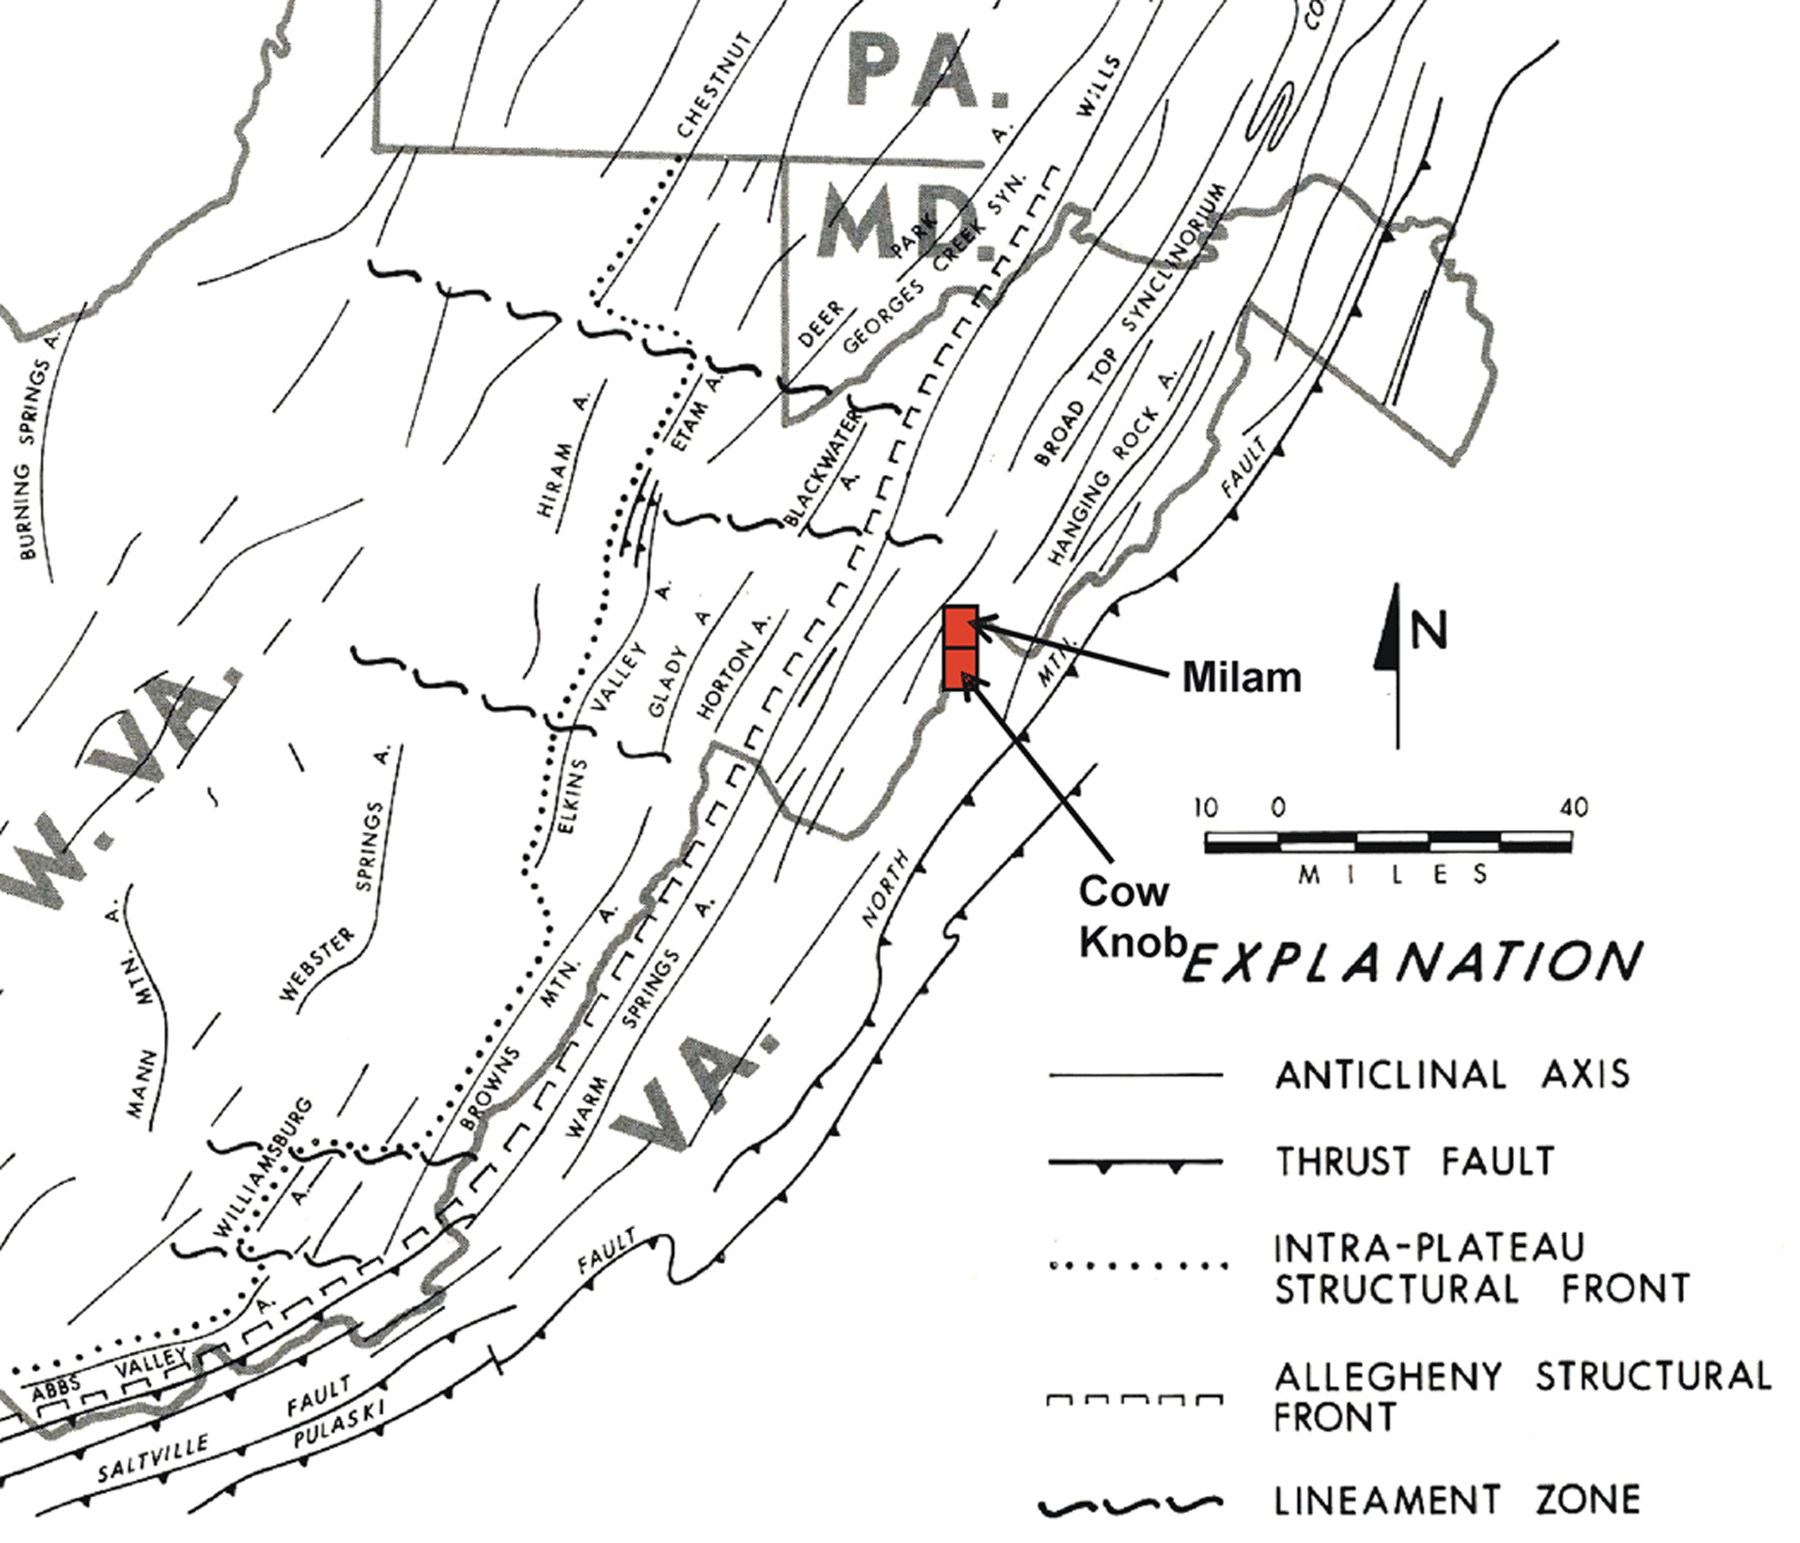 Physiographic provinces and the location of the Milam and Cow Knob Quadrangle